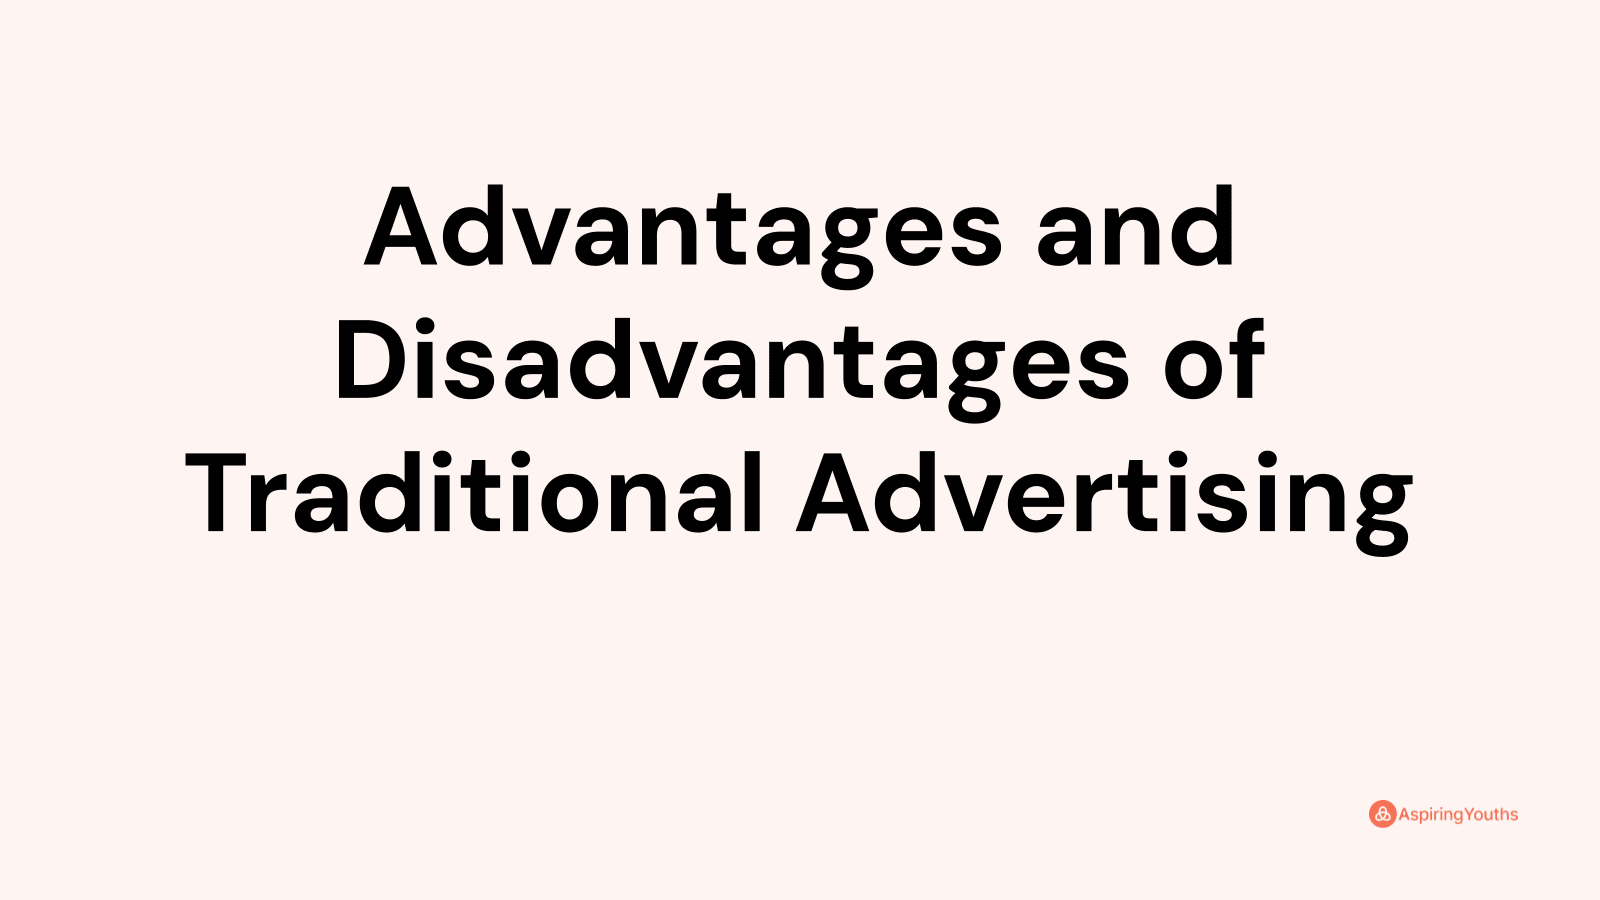 Advantages and disadvantages of Traditional Advertising